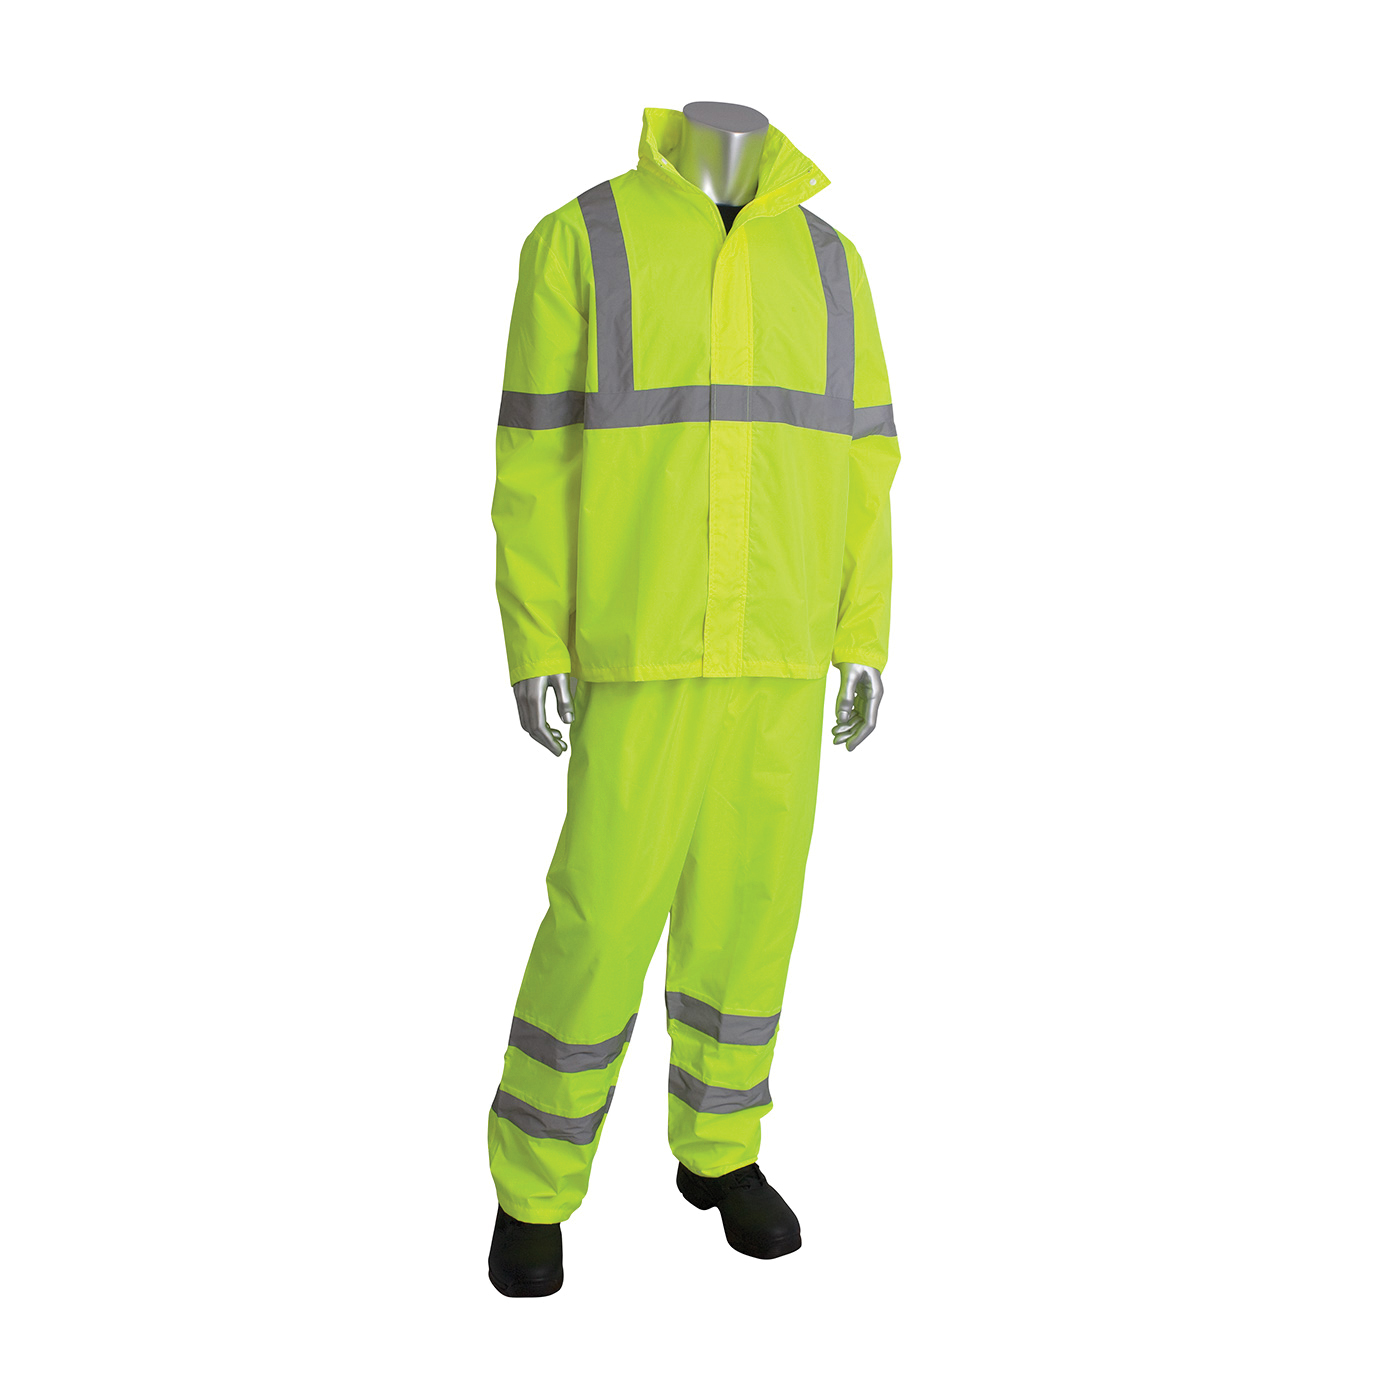 PIP® FALCON™ Viz™ 353-1000LY-S/M 2-Piece Rainsuit Set, S to M, Hi-Viz Yellow, Polyester, 40 in Waist, 31 in L Inseam, Concealable Hood